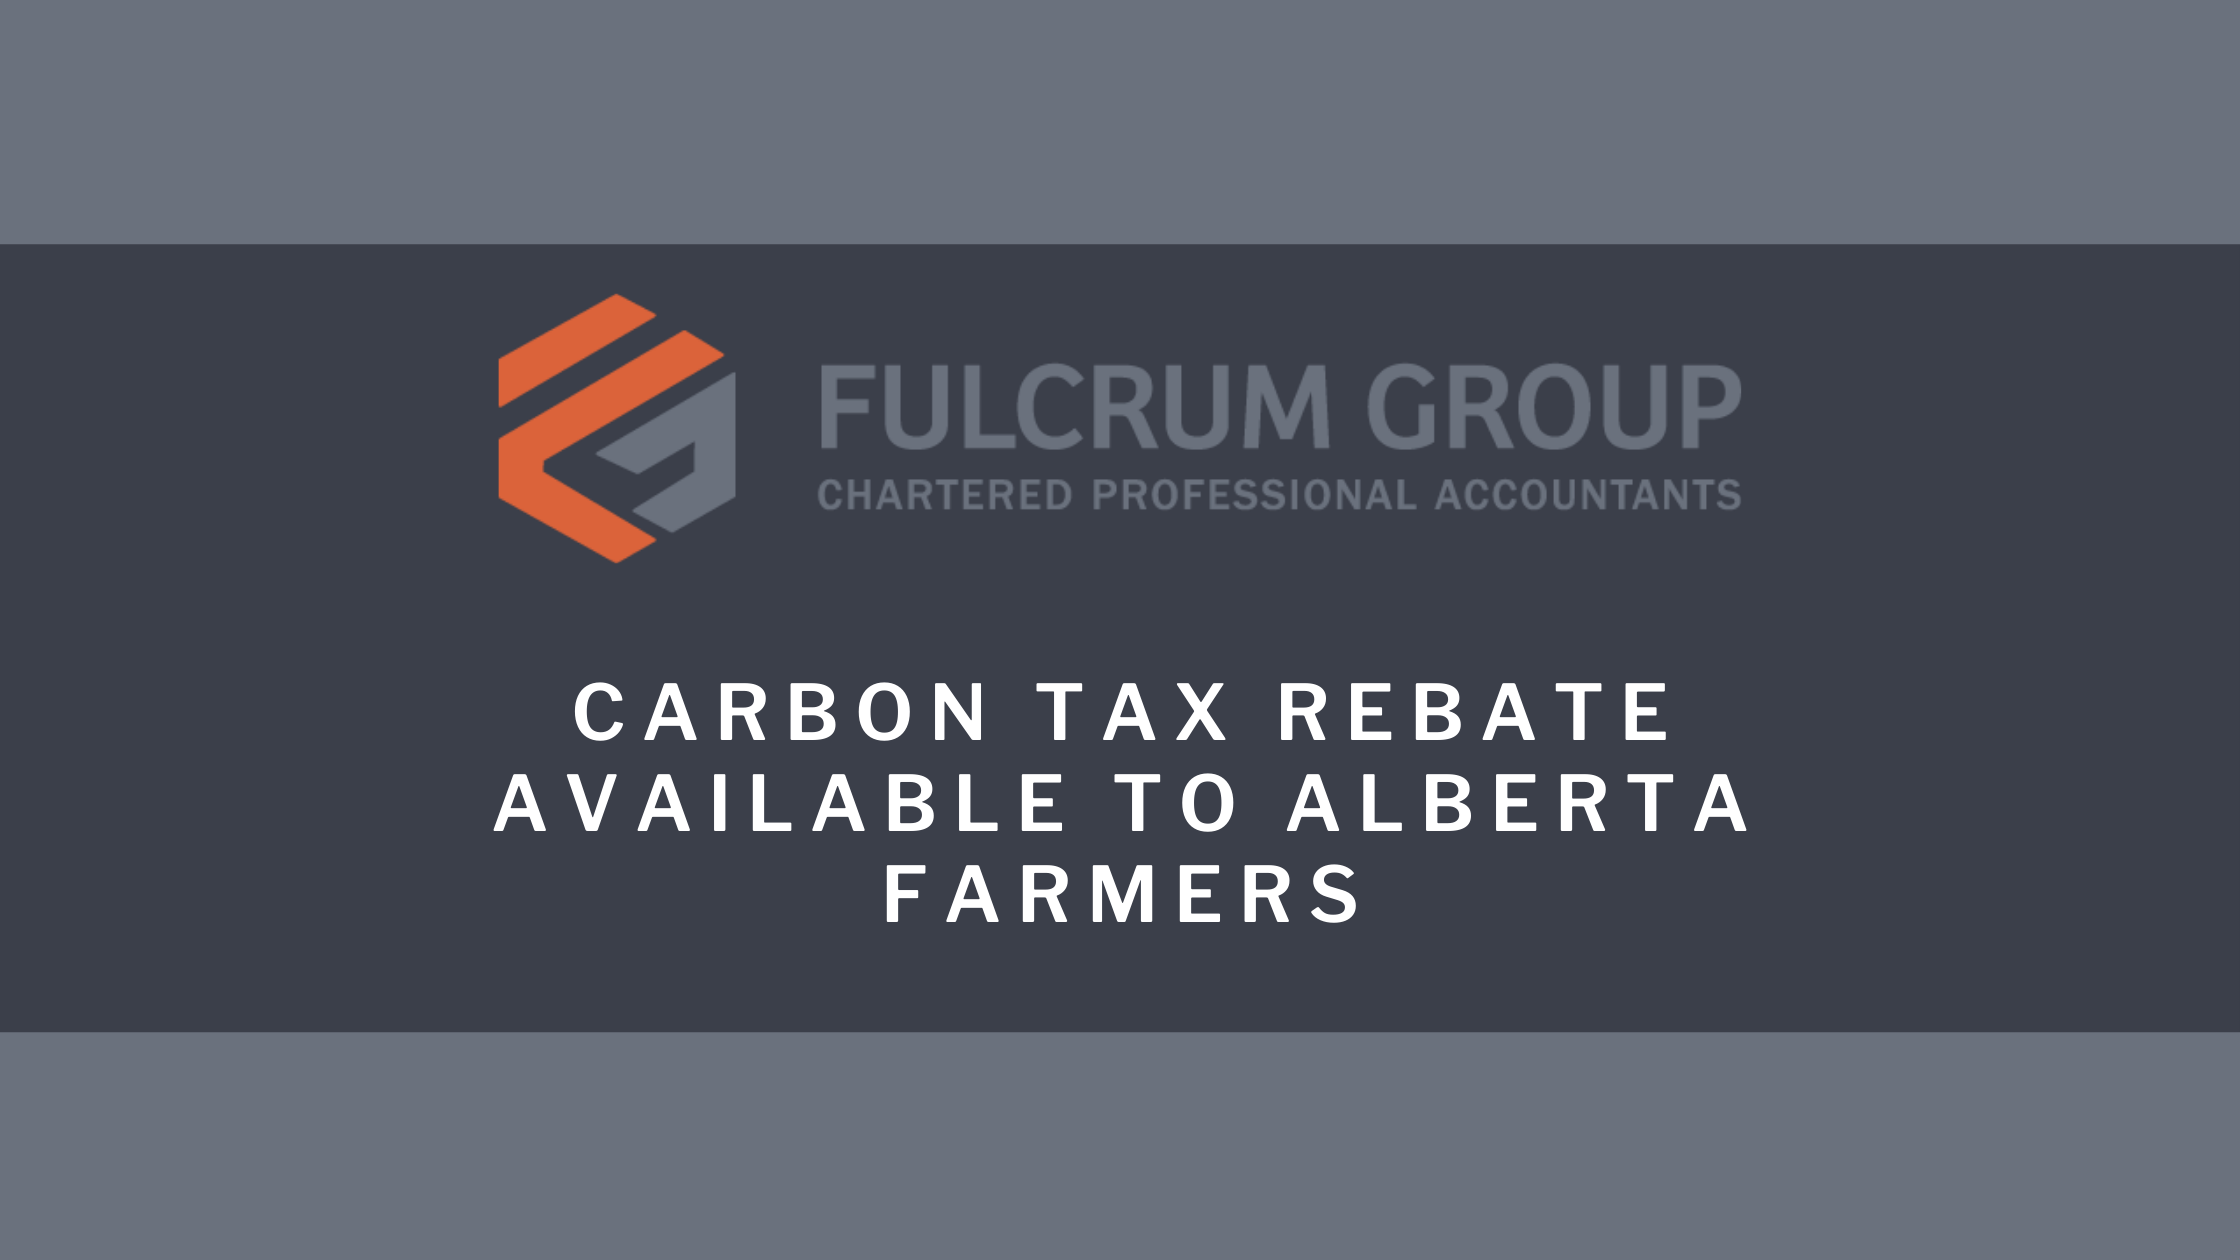 Carbon Tax Rebate Available To Alberta Farmers Fulcrum Group Chartered Professional